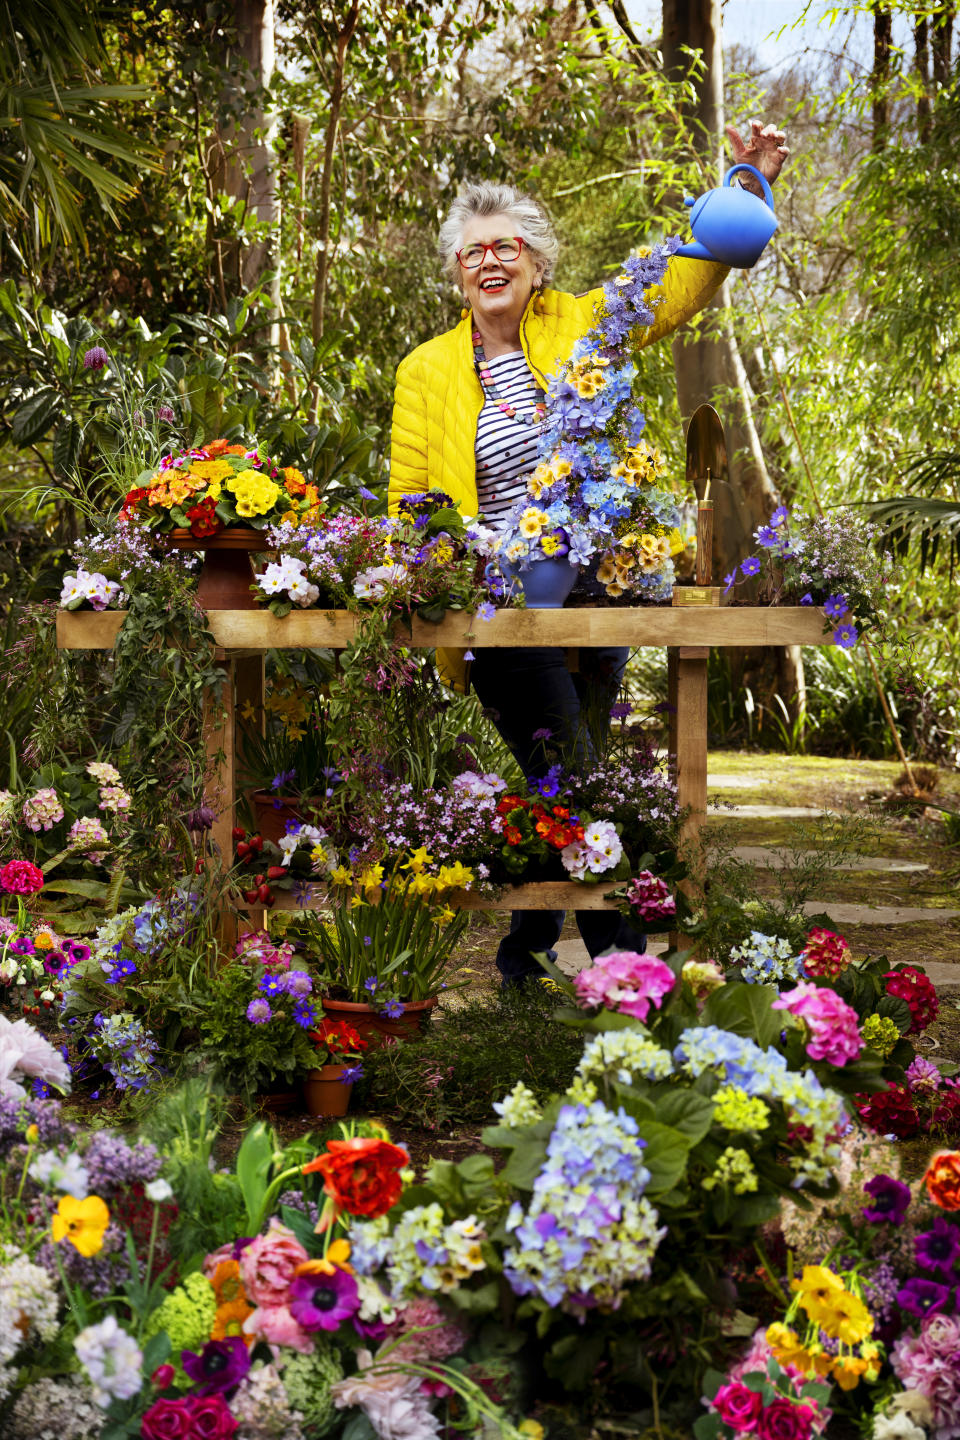 Joining Dame Prue are returning judges and award-winning garden designers, Matt Childs and Humaira Ikram, along with B&Q Outdoor Director, Steve Guy (Credit: Ian Gavan/Getty Images)